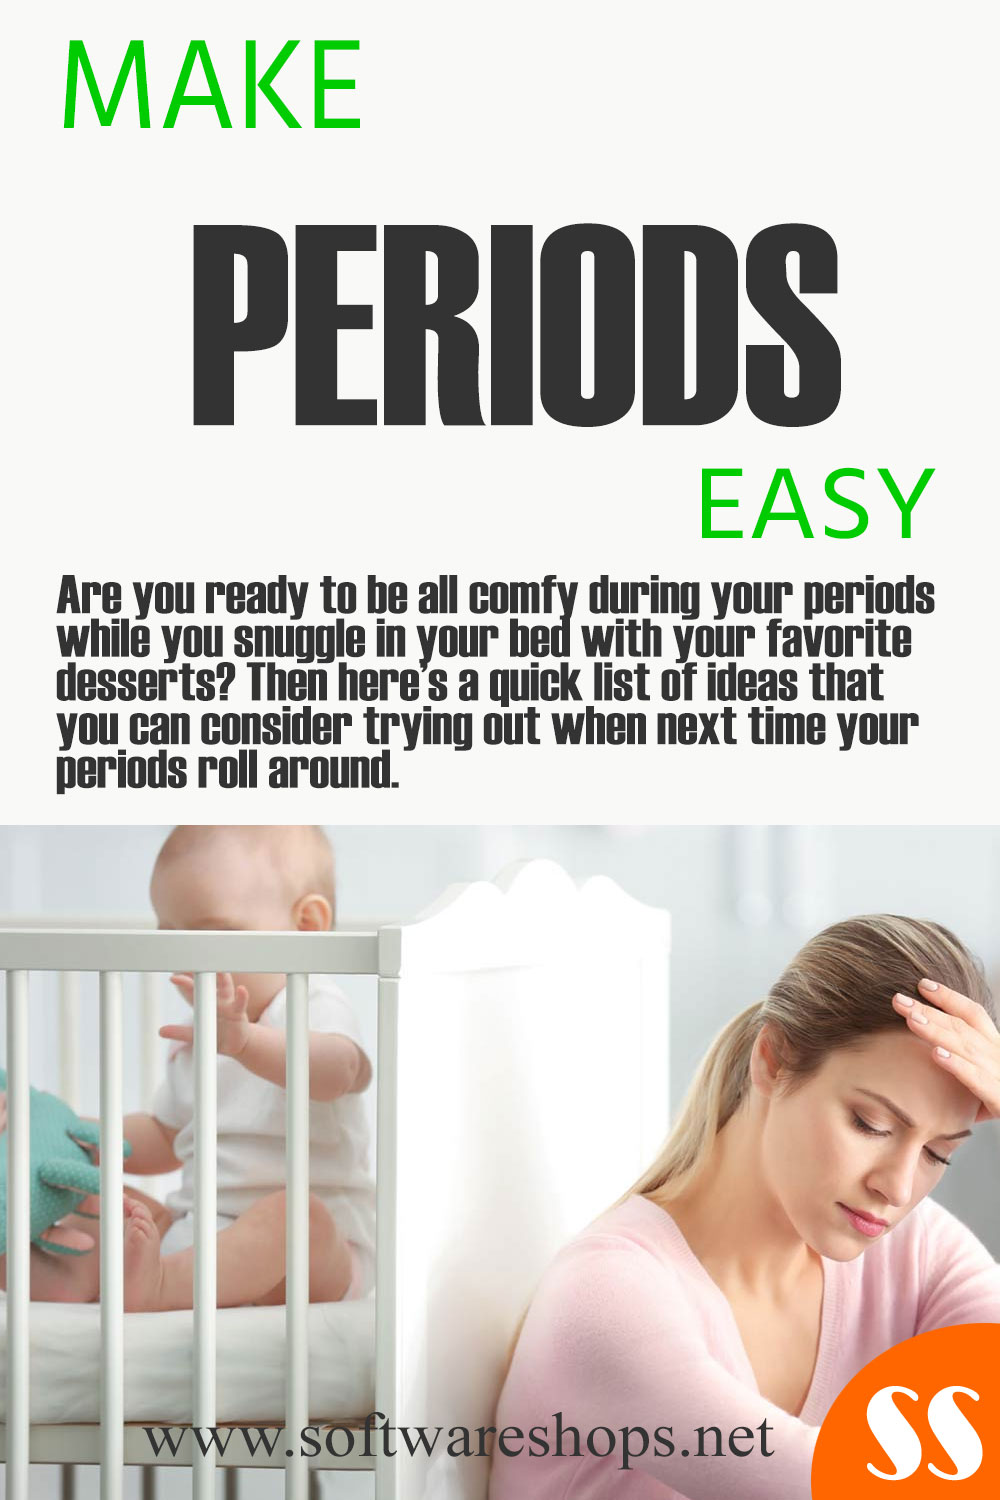 make periods easy